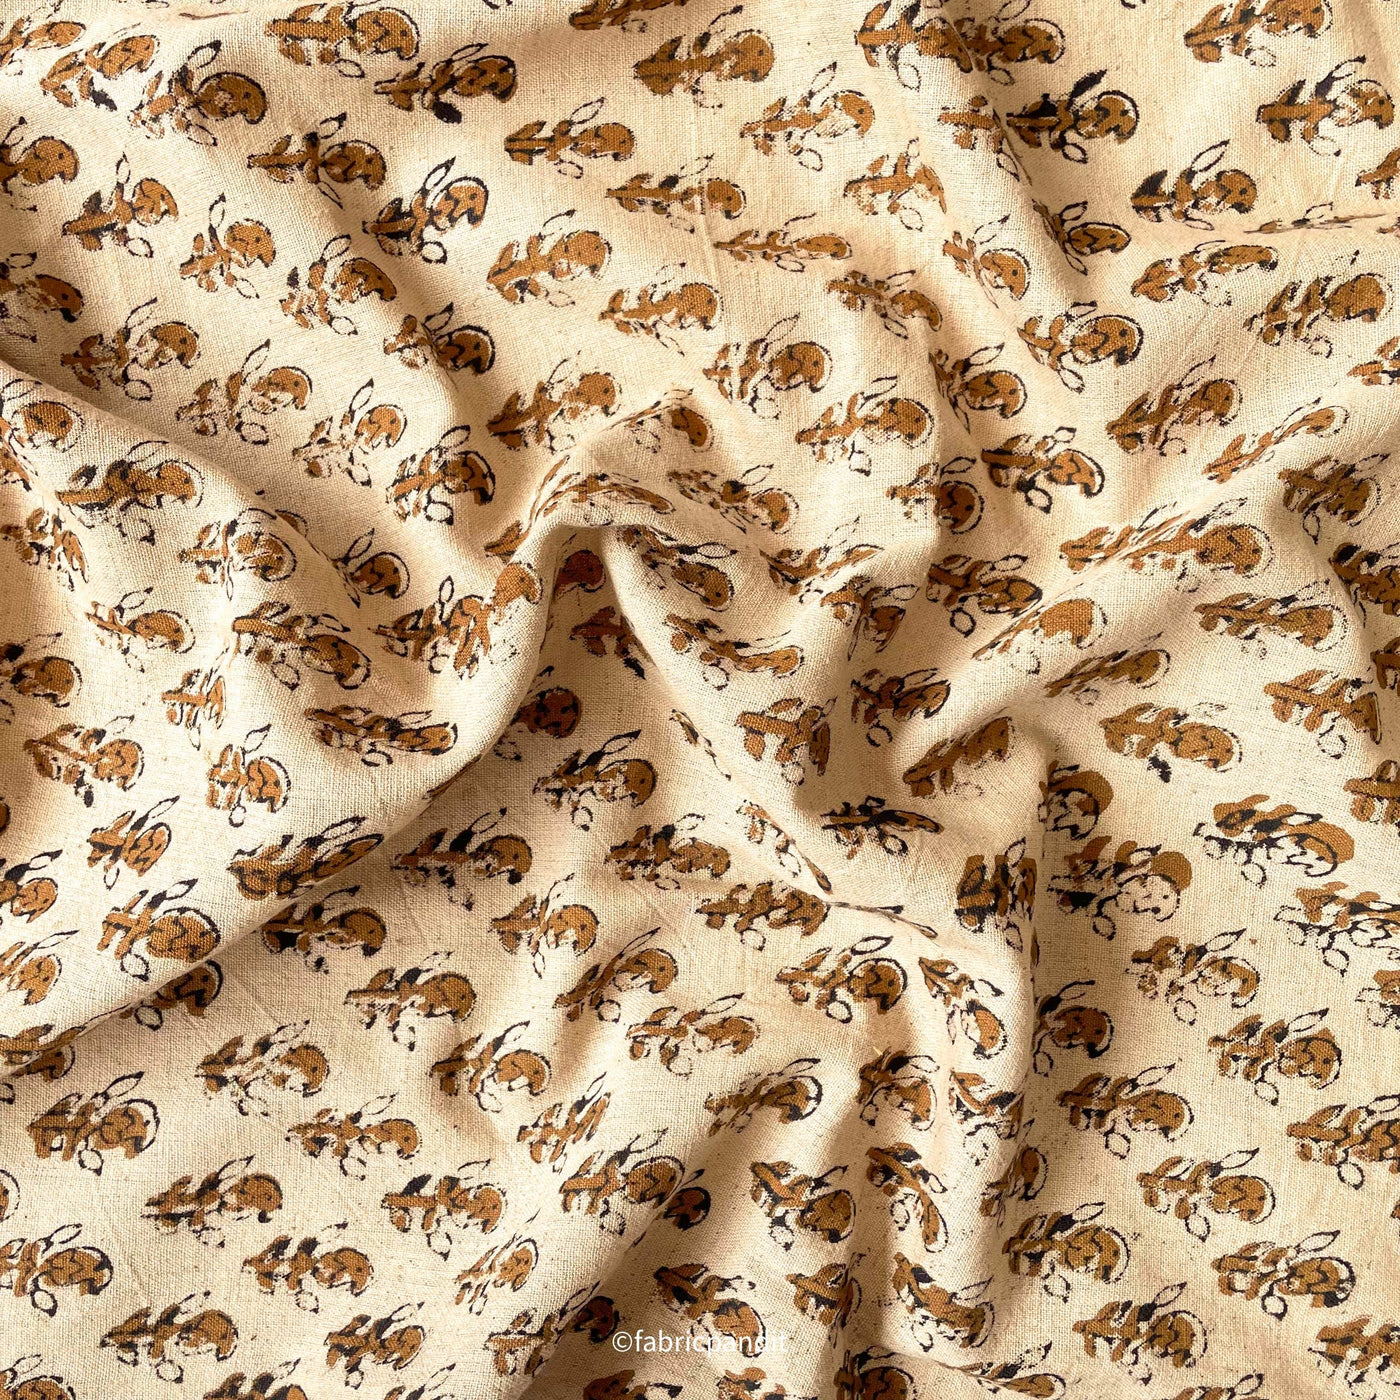 Fabric Pandit Fabric Dusty Beige & Brown Abstract Paisley Hand Block Printed Pure Cotton Linen Fabric (Width 42 inches)